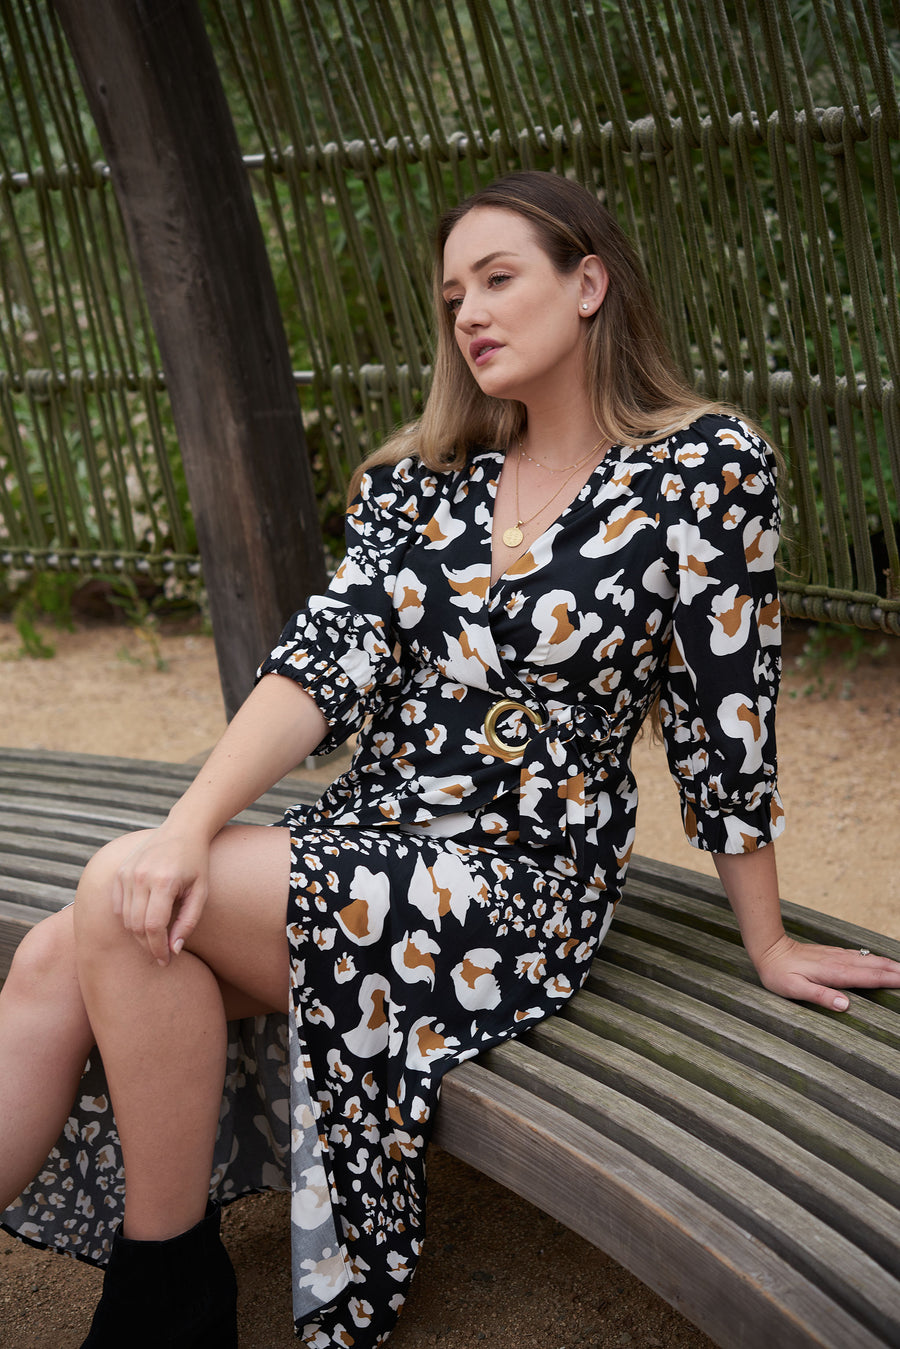 Feel comfortable, confident, and cute in our carefully curated postpartum fashion line, featuring the elegant ANDI adjustable wrap dress.